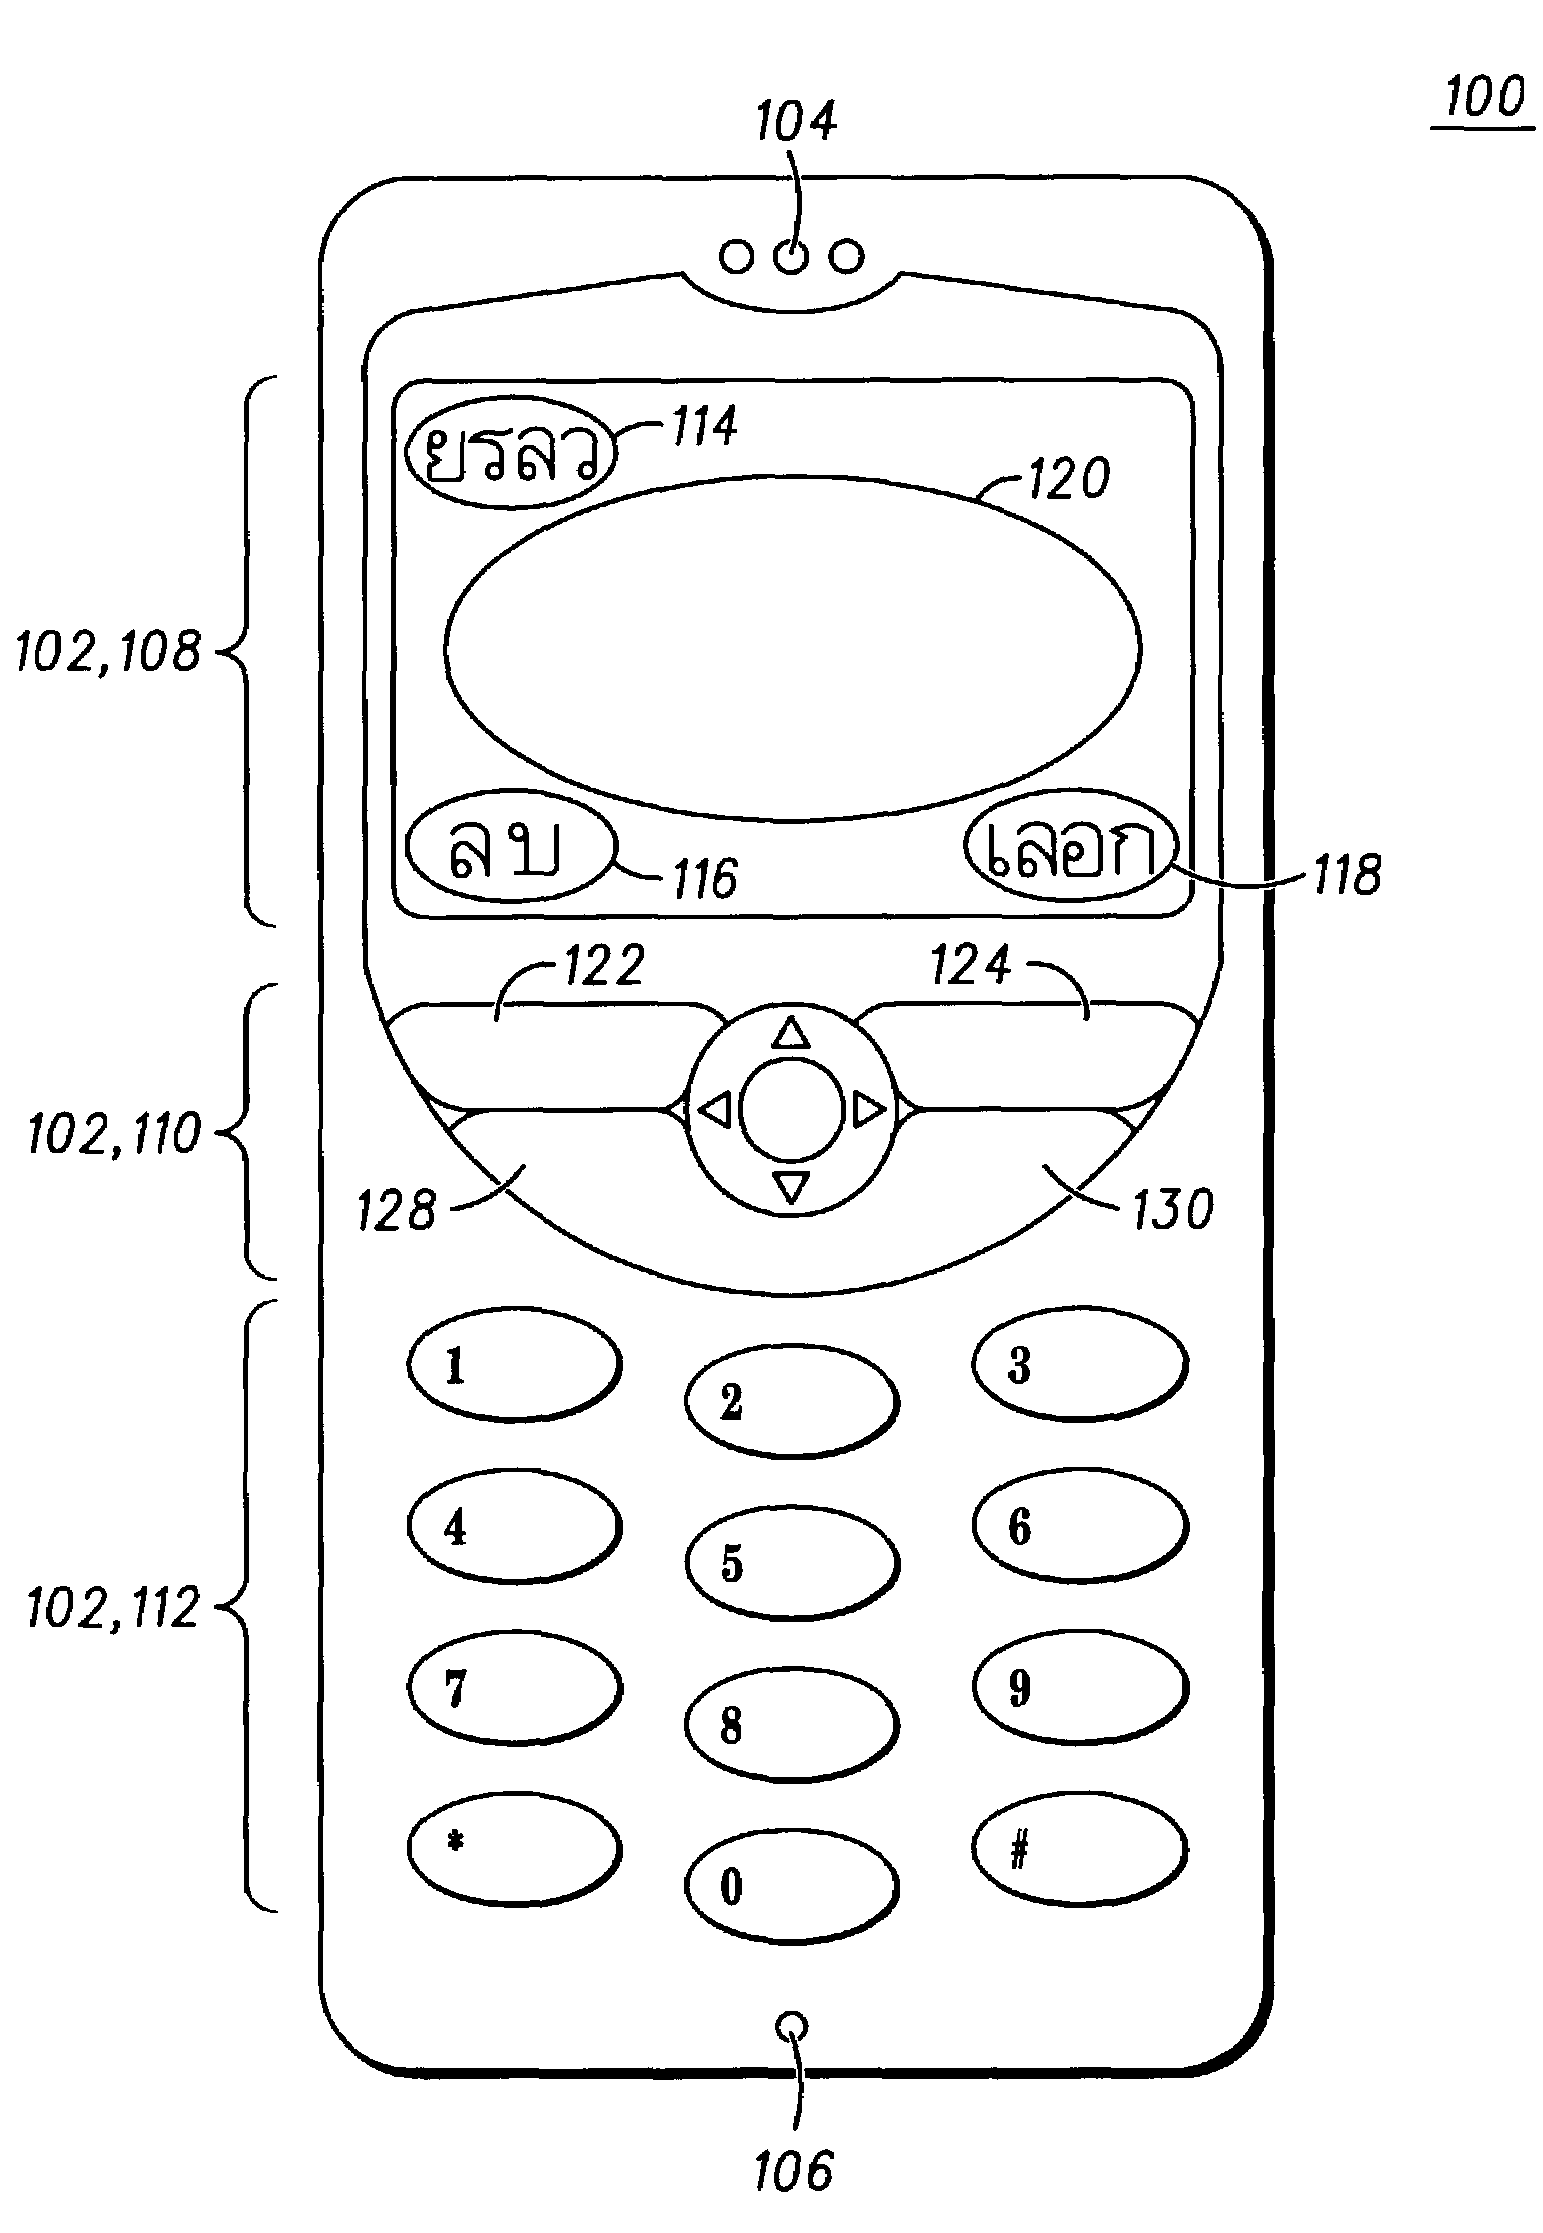 User interface of a keypad entry system for character input